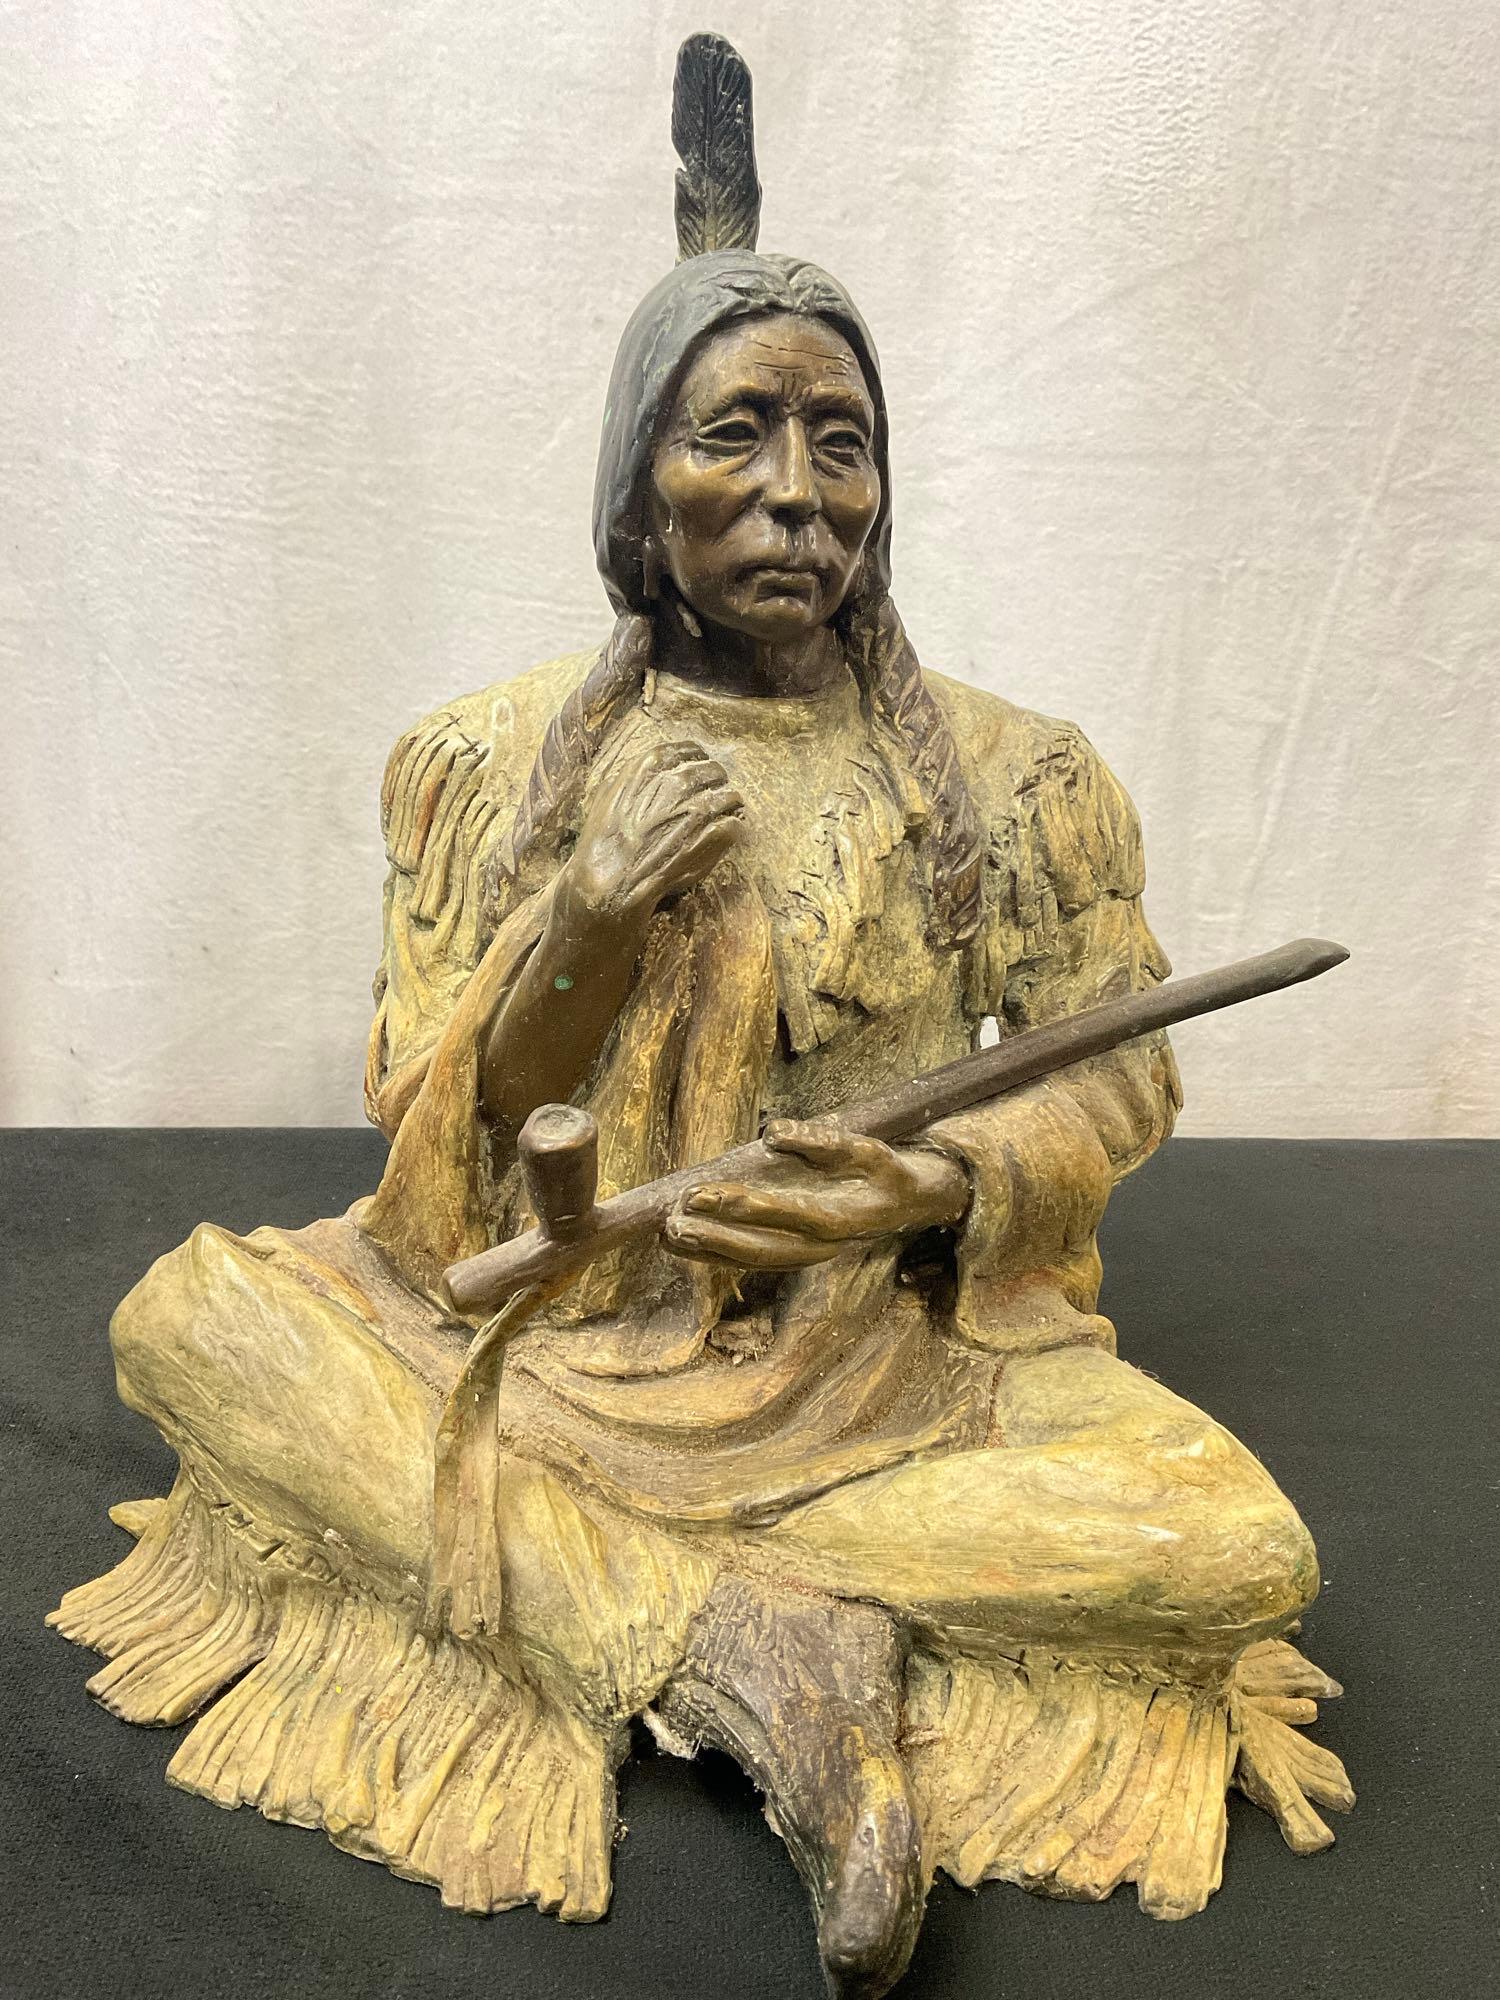 Old Warrior bronze statue signed by Marie Barbera, approx 12 inch tall